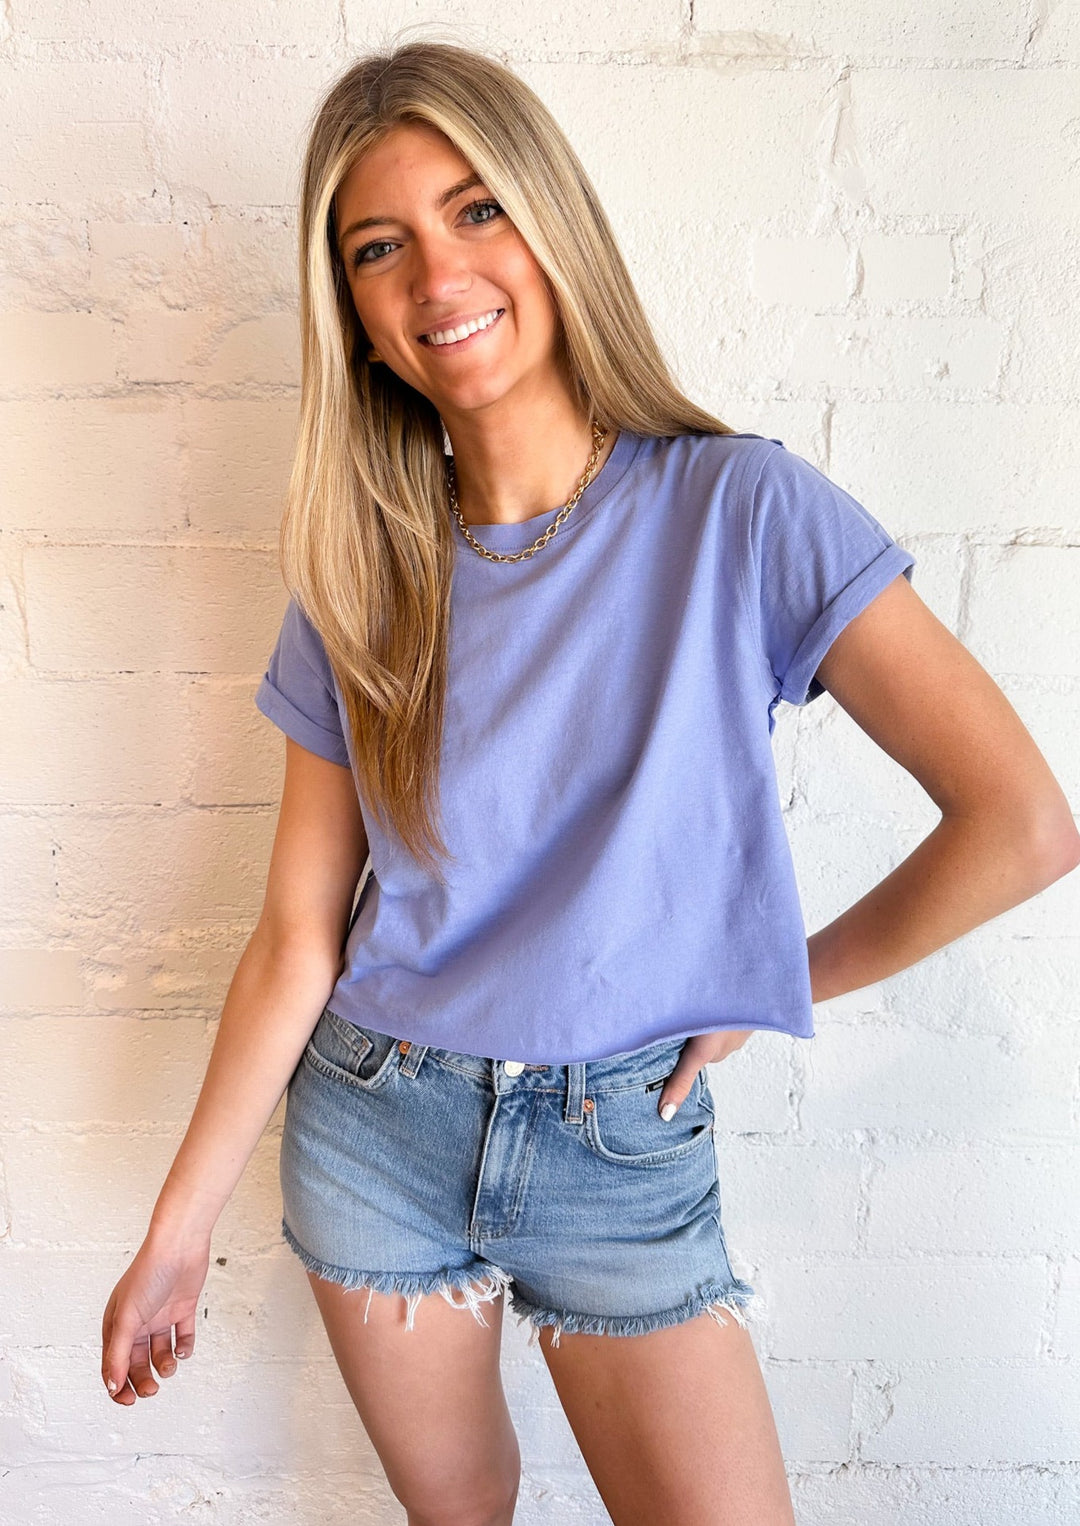 Free People The Perfect Tee, Tops, Adeline, Adeline, dallas boutique, dallas texas, texas boutique, women's boutique dallas, adeline boutique, dallas boutique, trendy boutique, affordable boutique